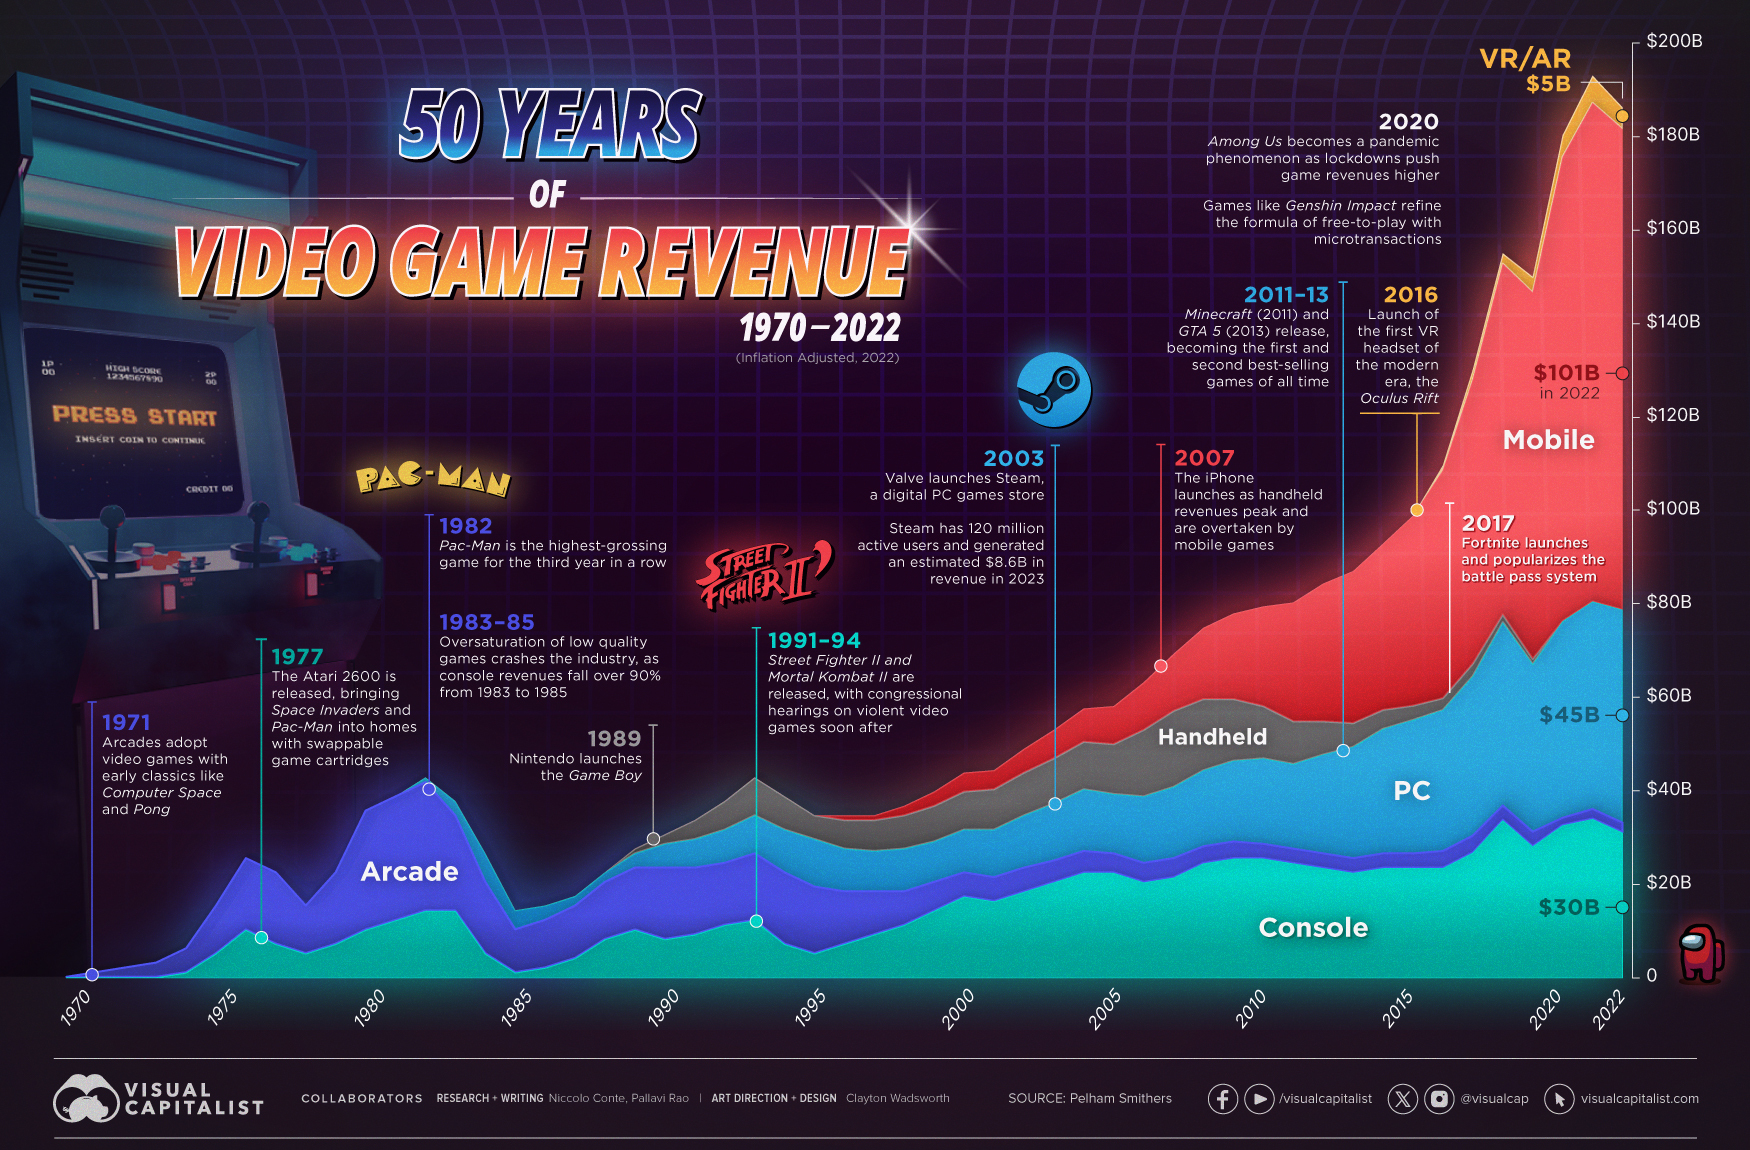 Area chart showing 50 years of video game industry revenue by device category